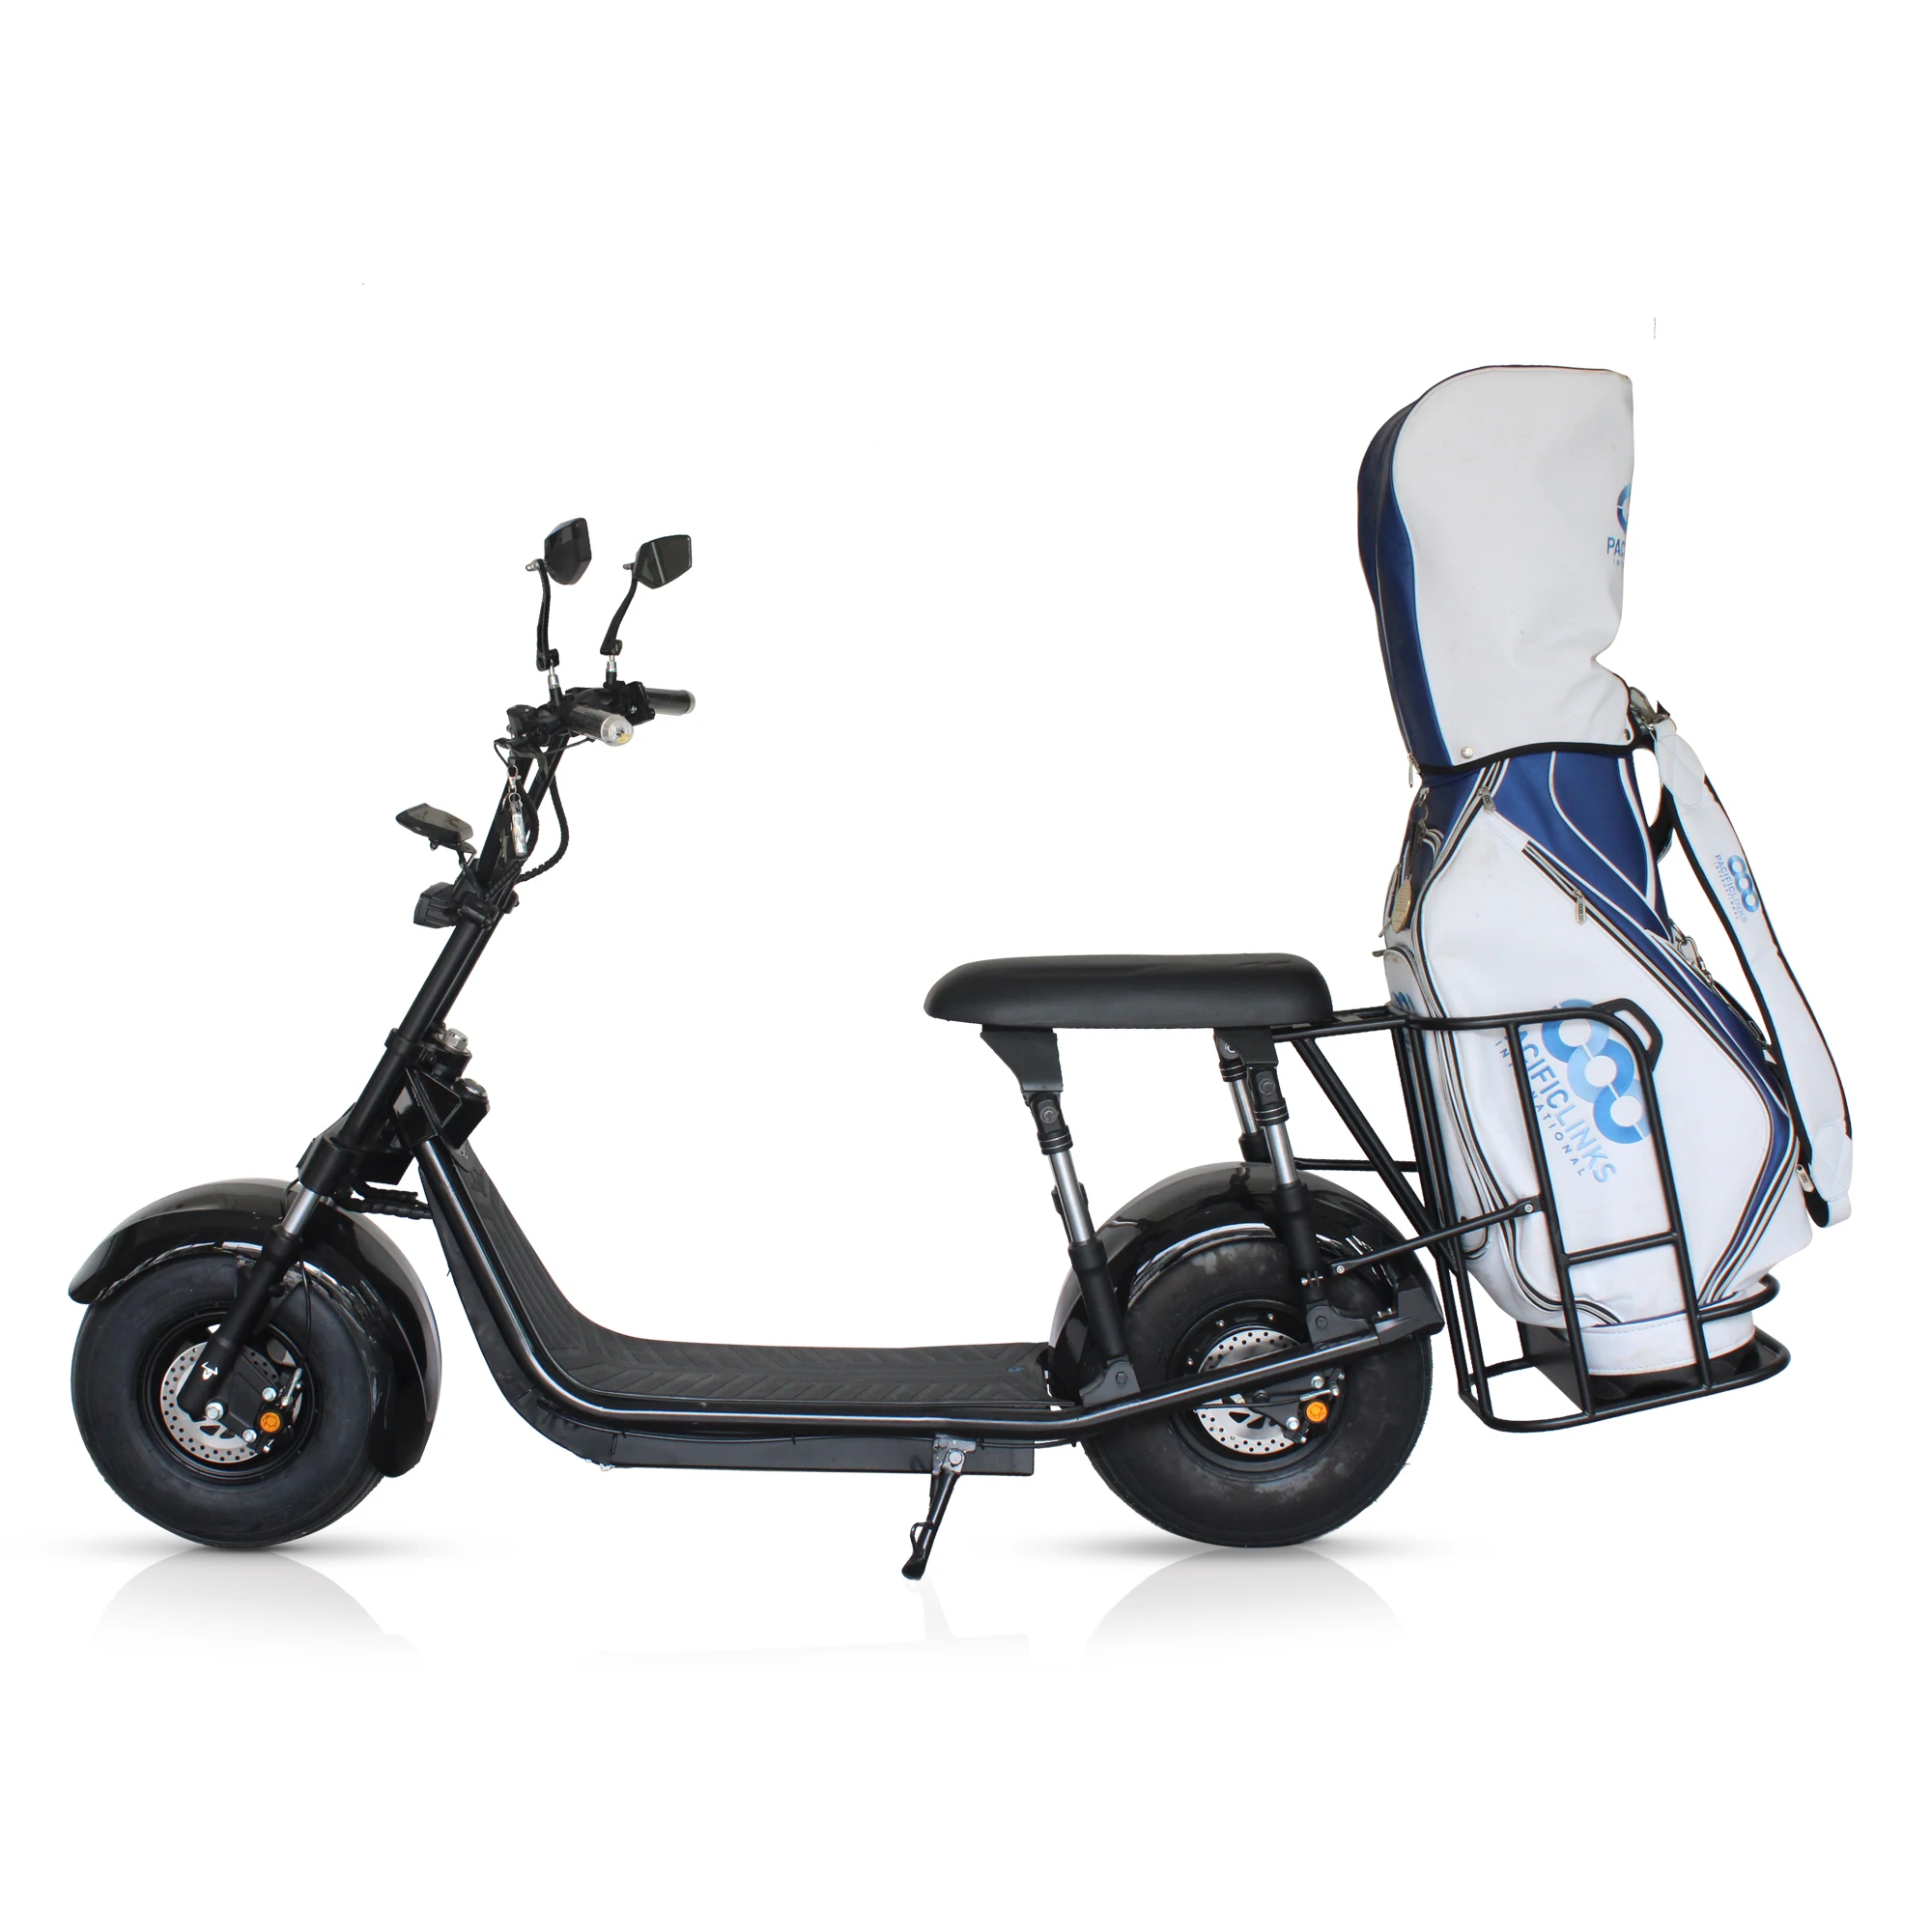 

USA Warehouse Powerful Mobility Removable Battery Citycoco Adult Electric 2000W Motorcycle Scooter With Golf Rack, Black/purple/gold/customized color